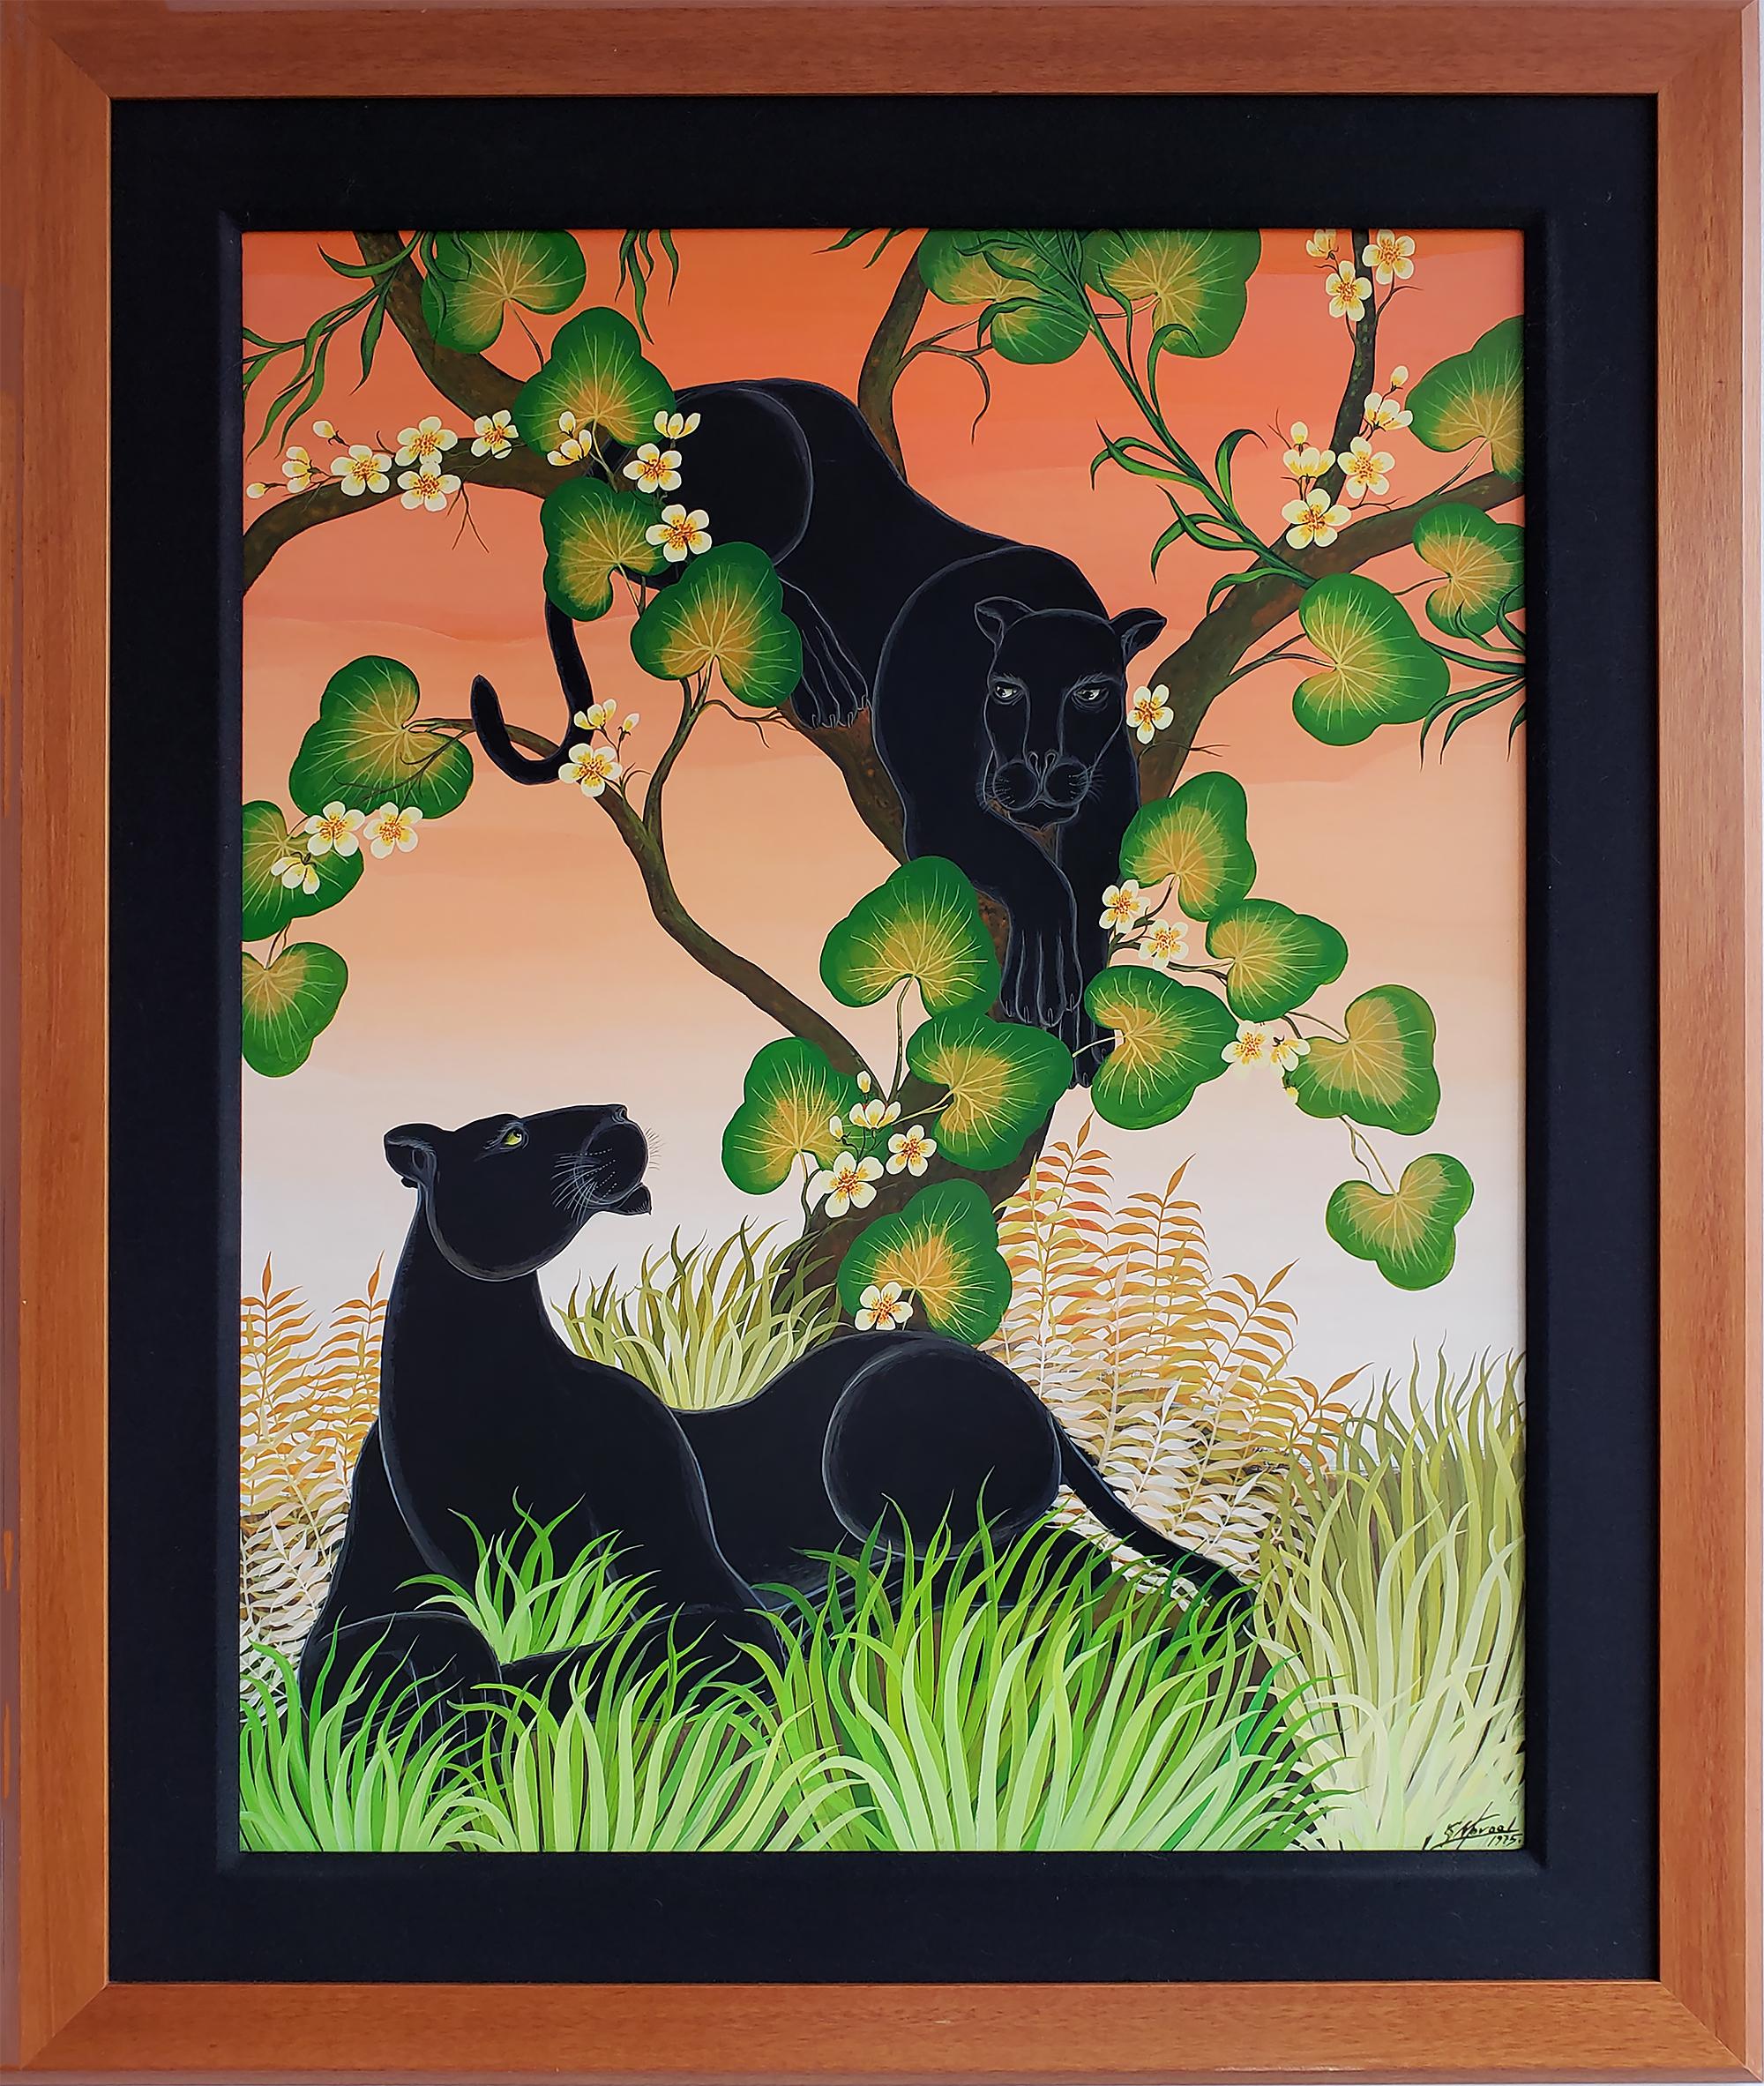 Black Panthers in a tree with a peach sky - Painting by Gustavo Novoa